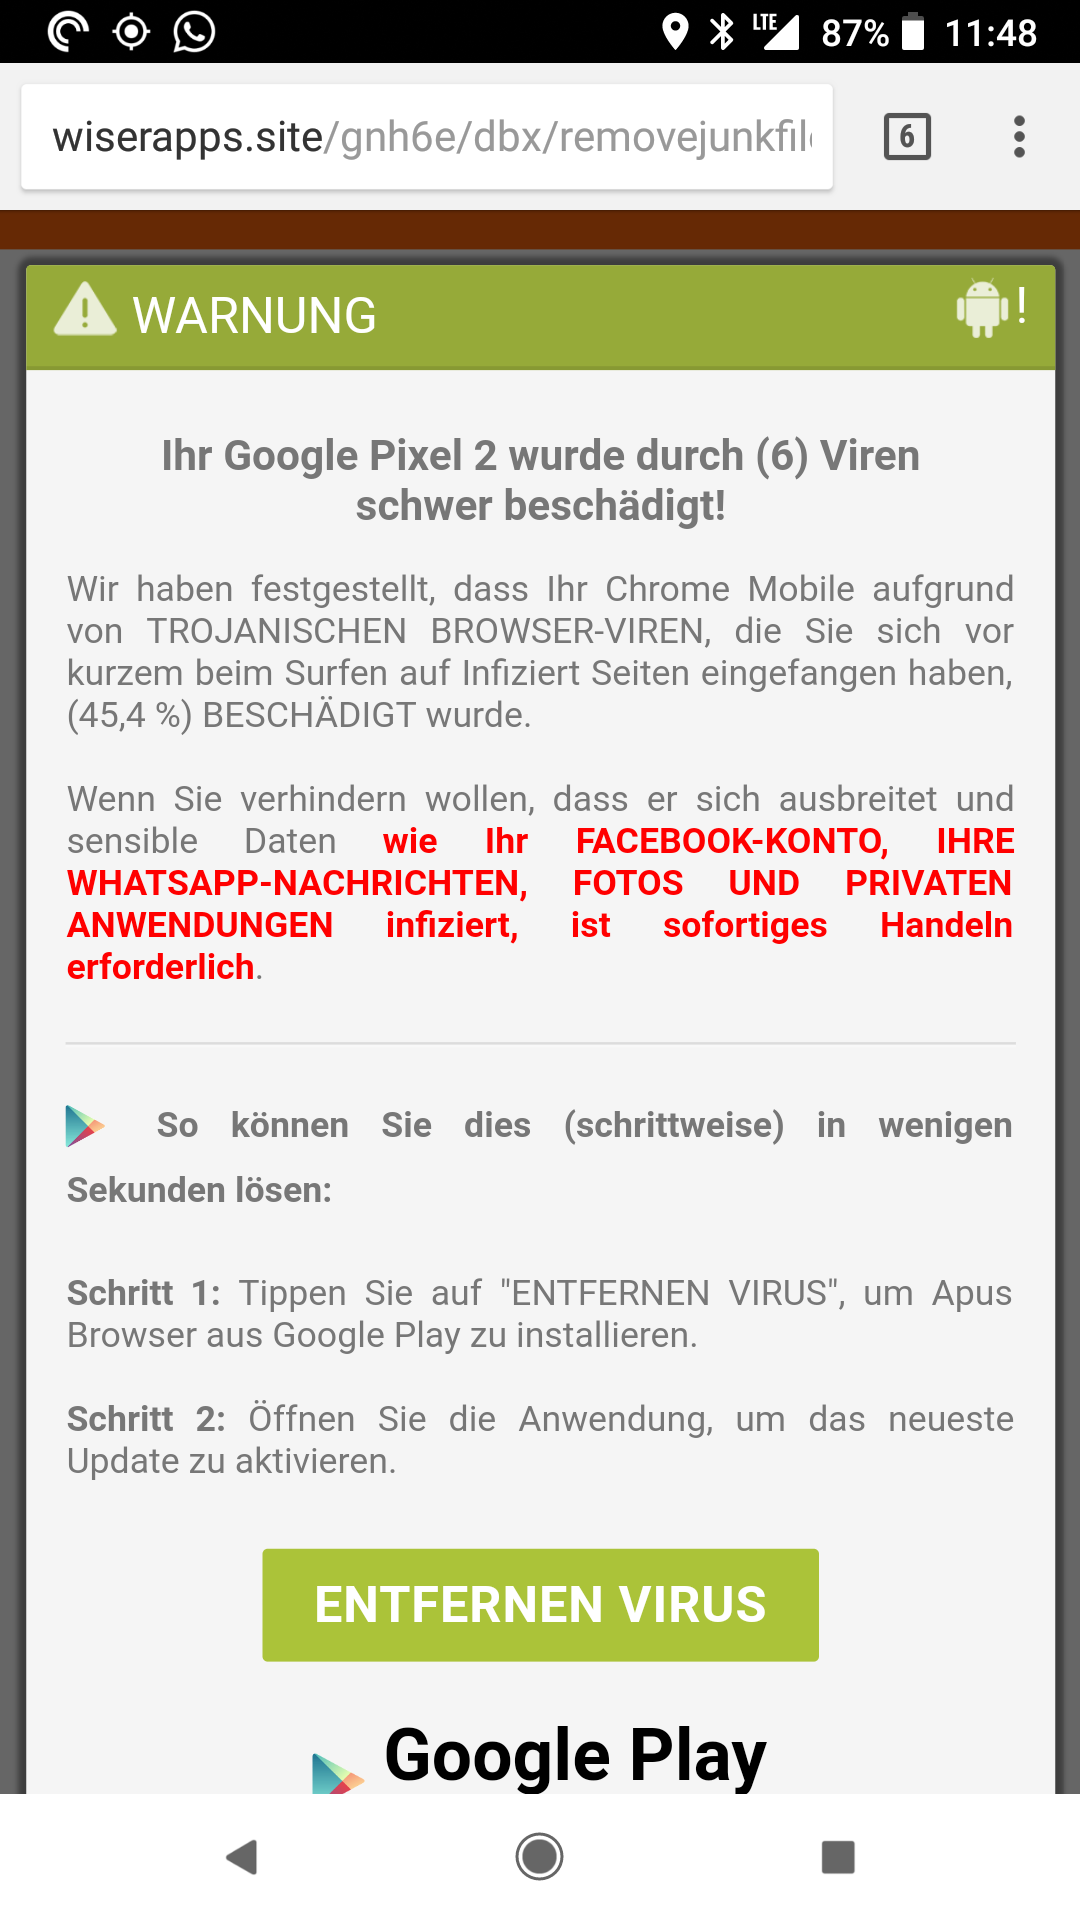 Wiserapps popup